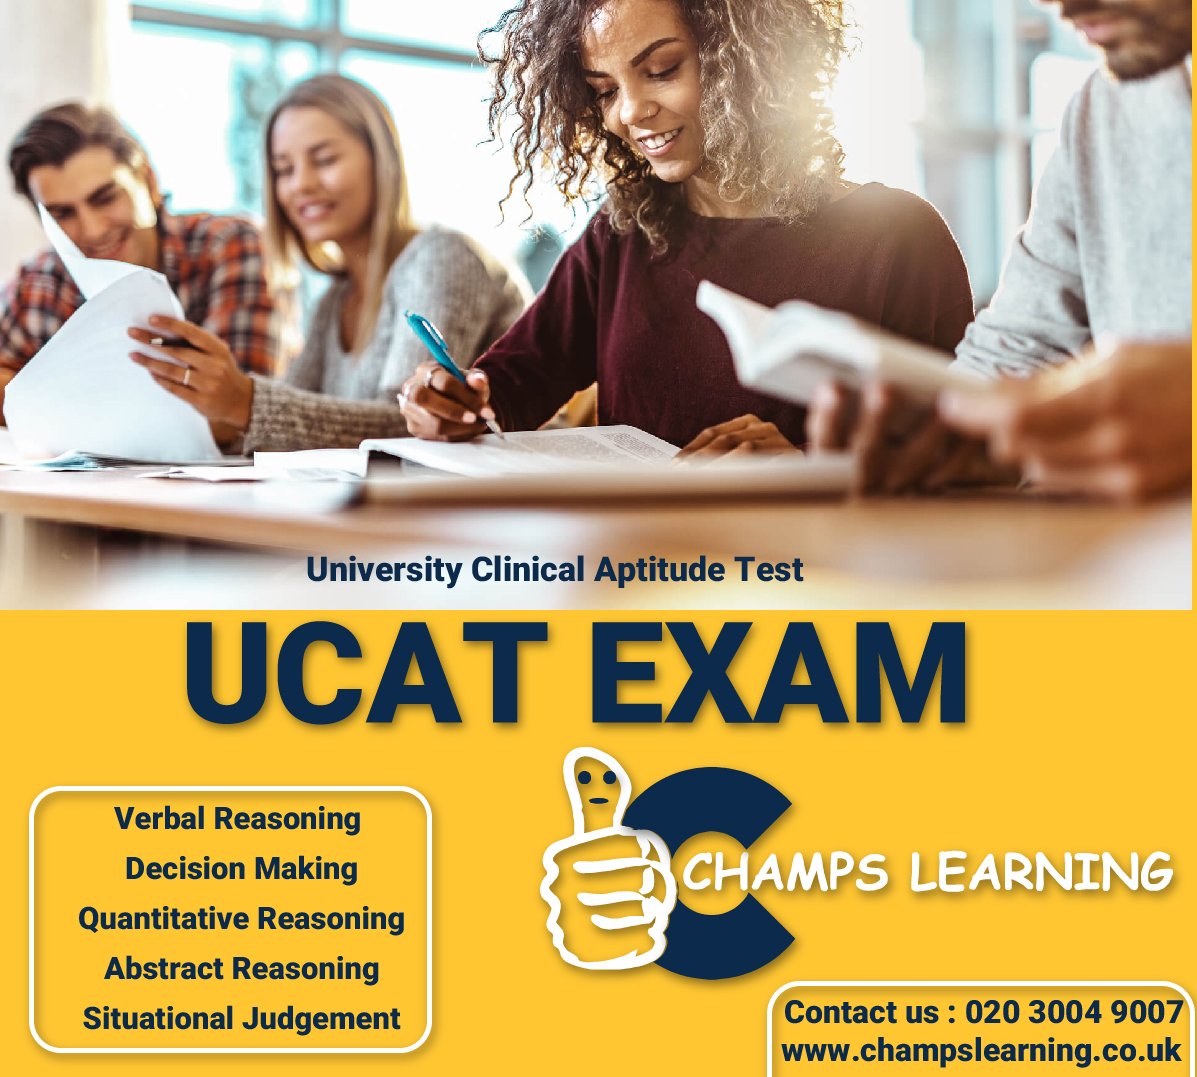 Join us for an immersive workshop designed for your growth to UCAT test preparation. #ucat2023 #UCAT #ucatexam #MedicalEntranceTest #admissionsexam #testpreparation #exampreparation #ucatpractice #ucatstudy #ucattips #ucatsuccess #MedicalAdmissions #hounslow #london #uk #england